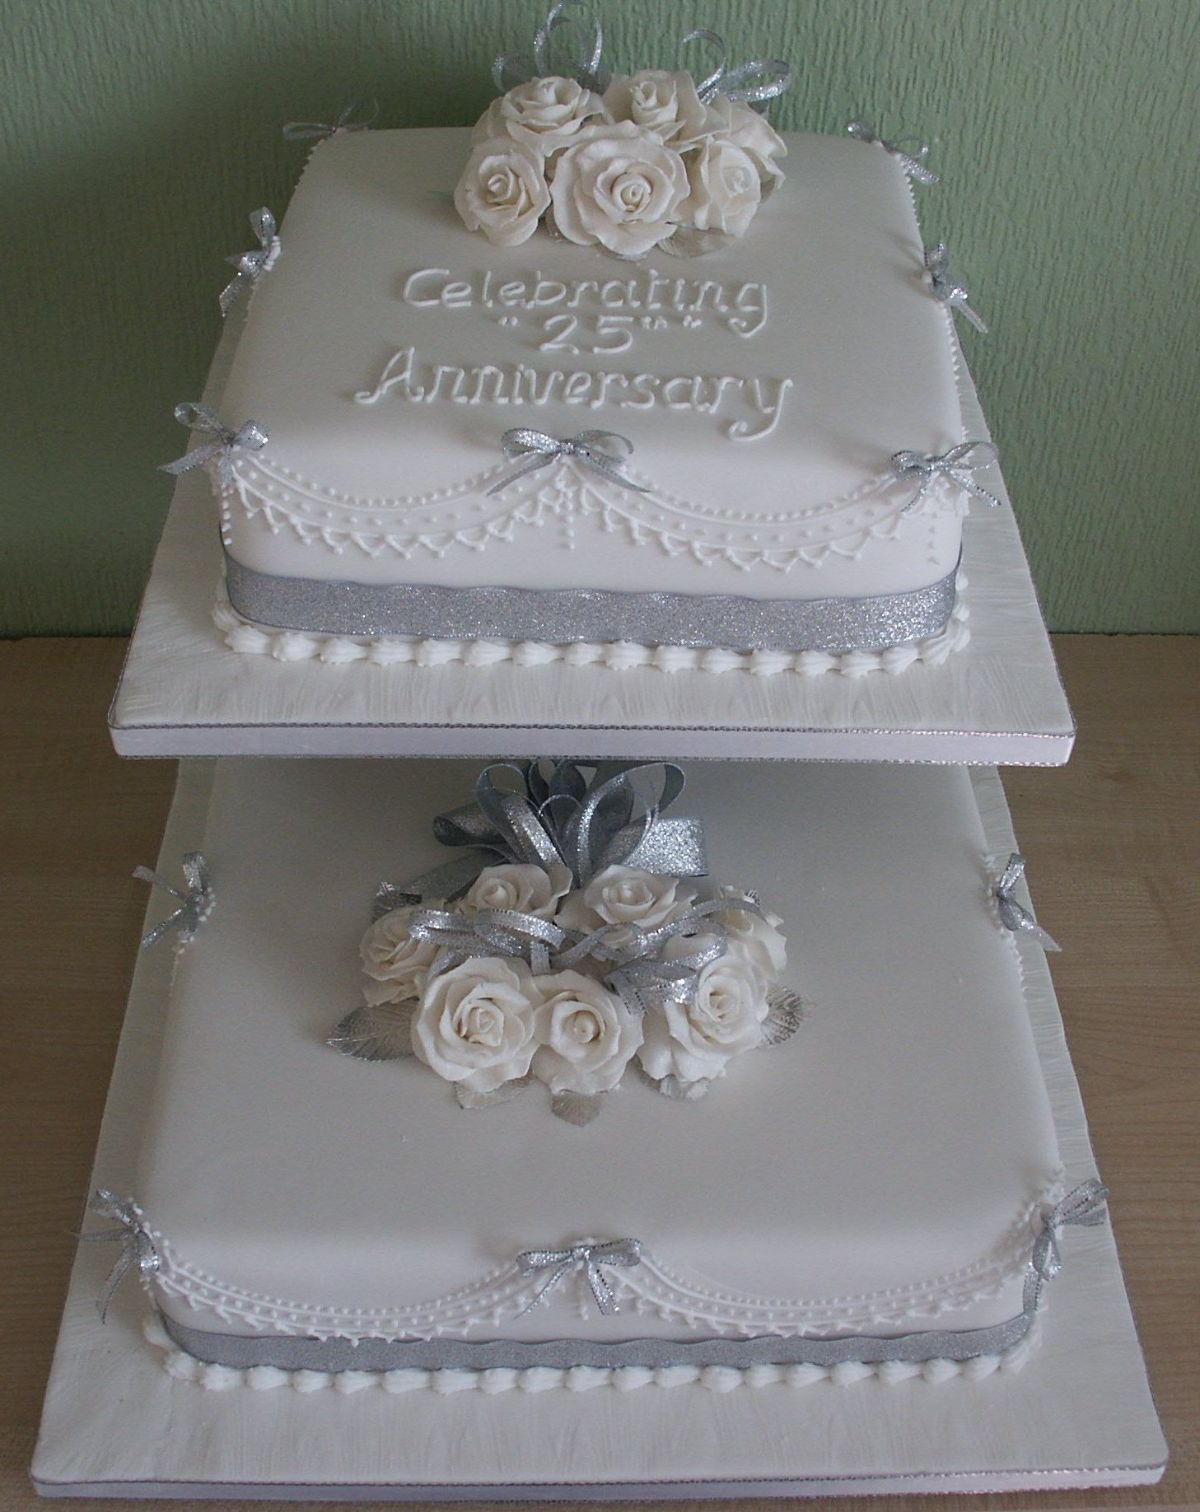 Annes Cakes For All Occasions-Image-75